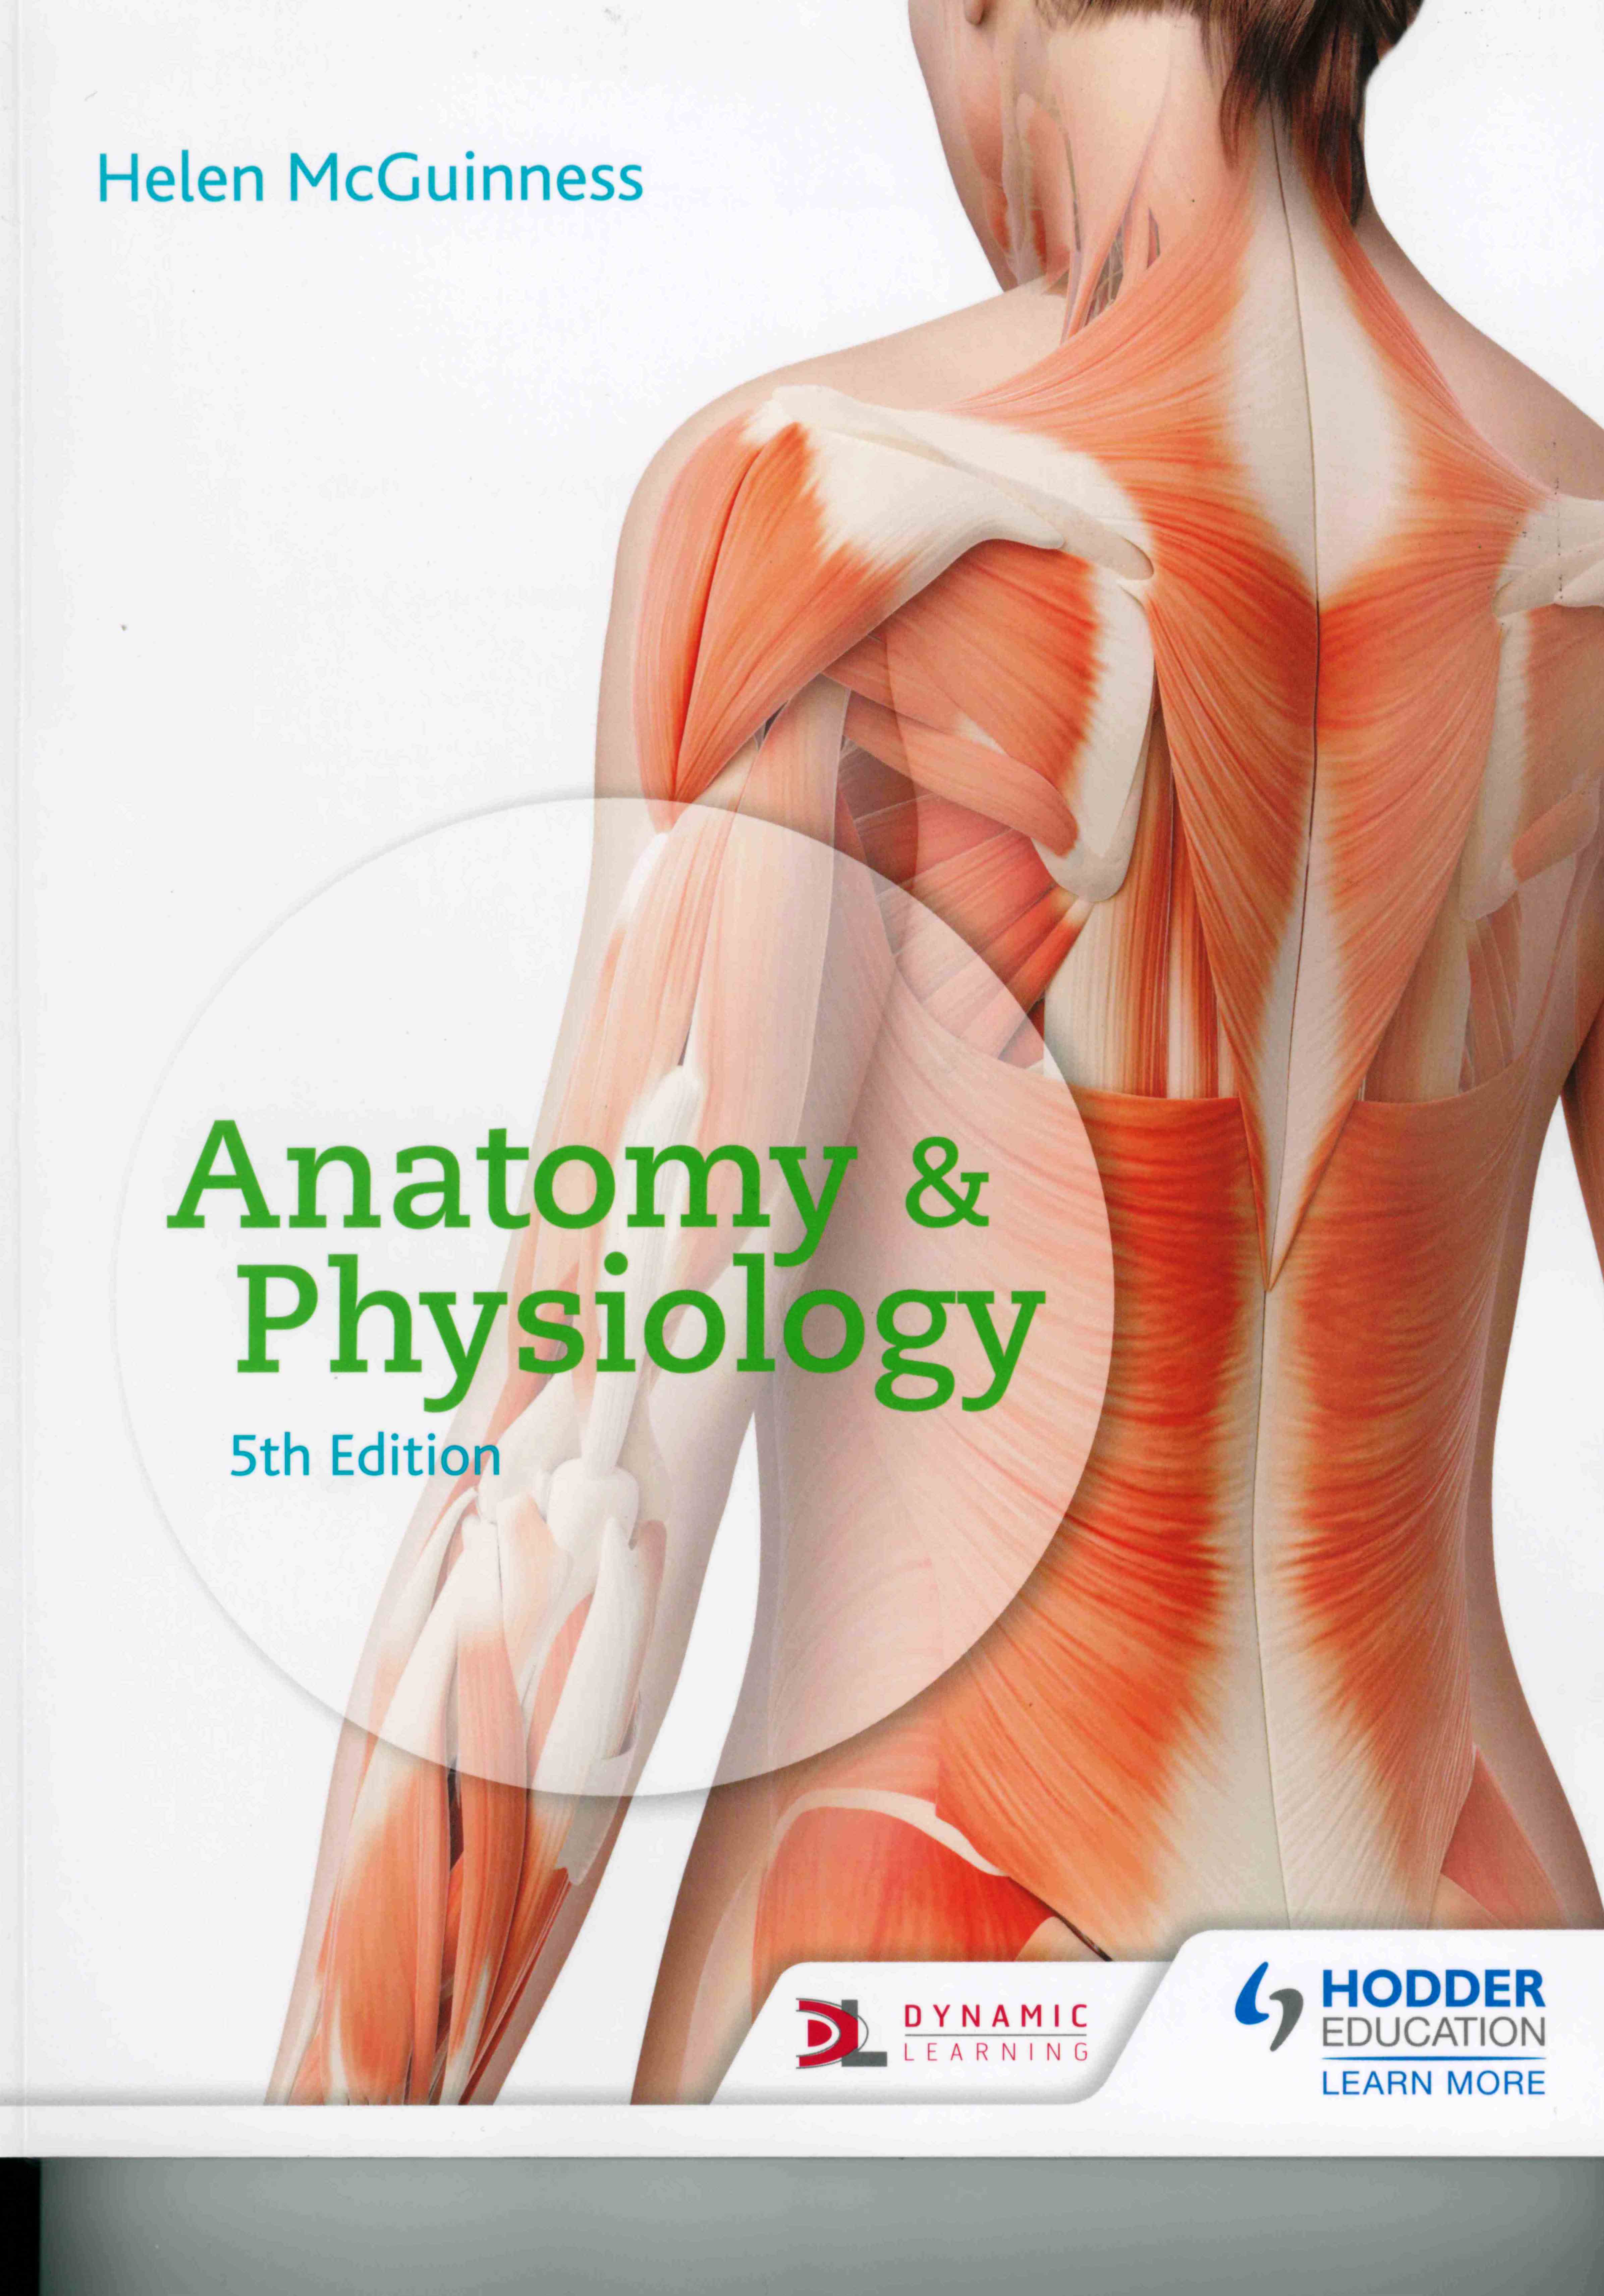 Anatomy & Physiology, Fifth Edition by Helen McGuinness